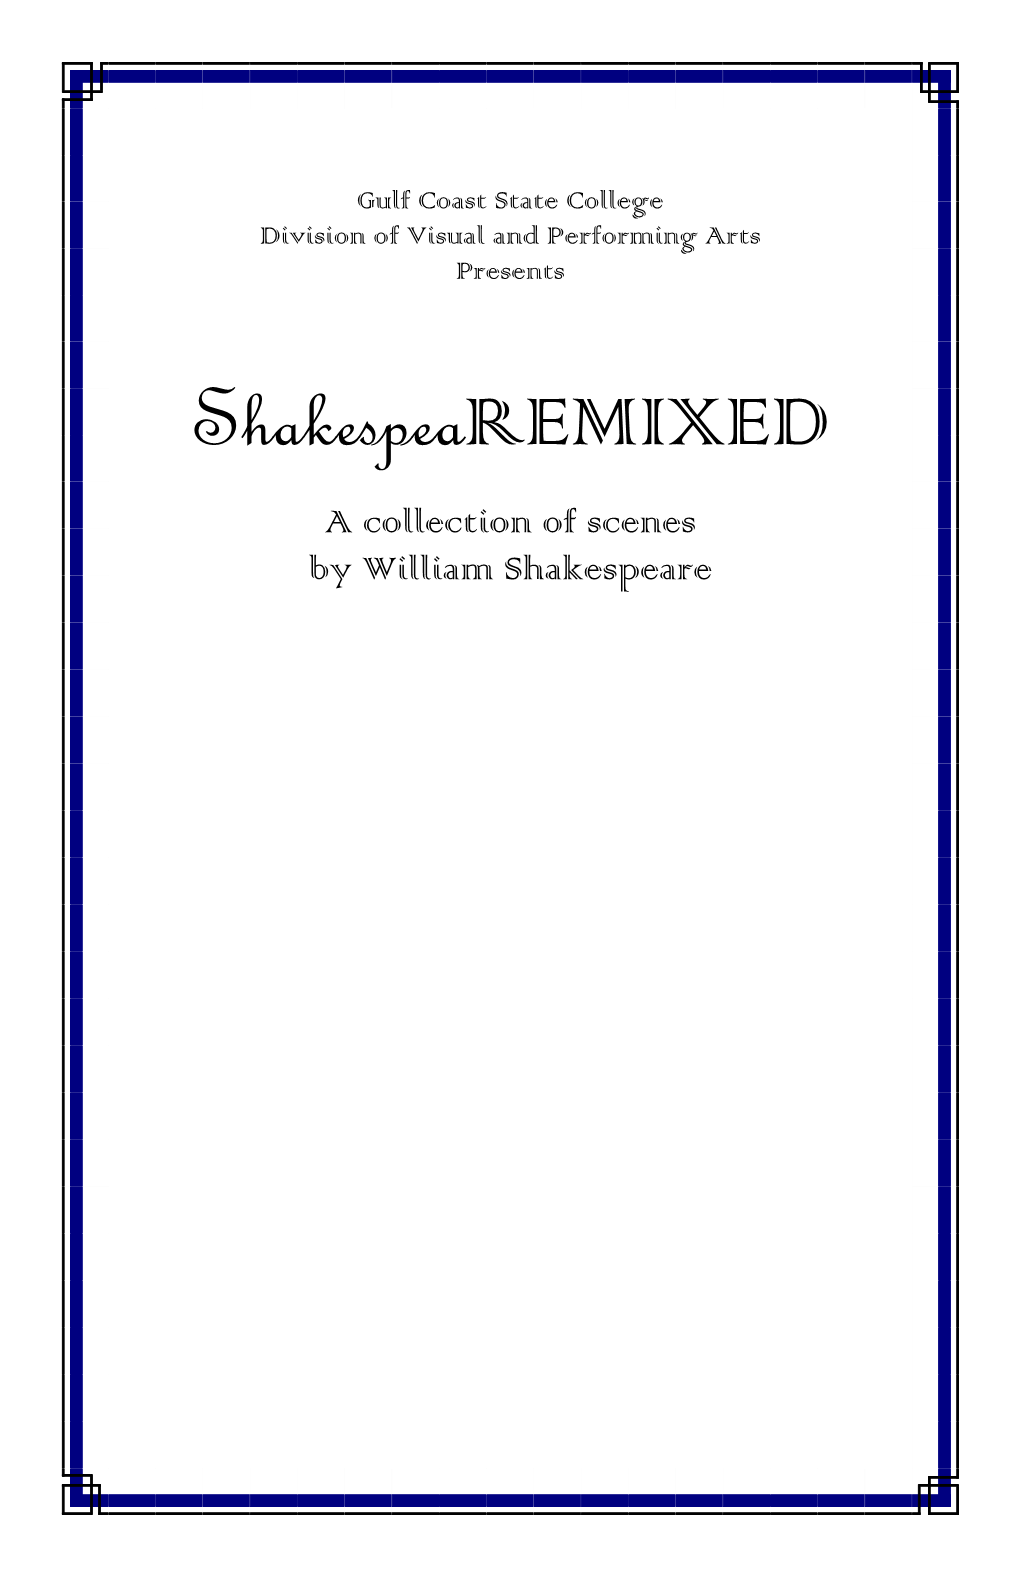 Shakespearemixed a Collection of Scenes by William Shakespeare